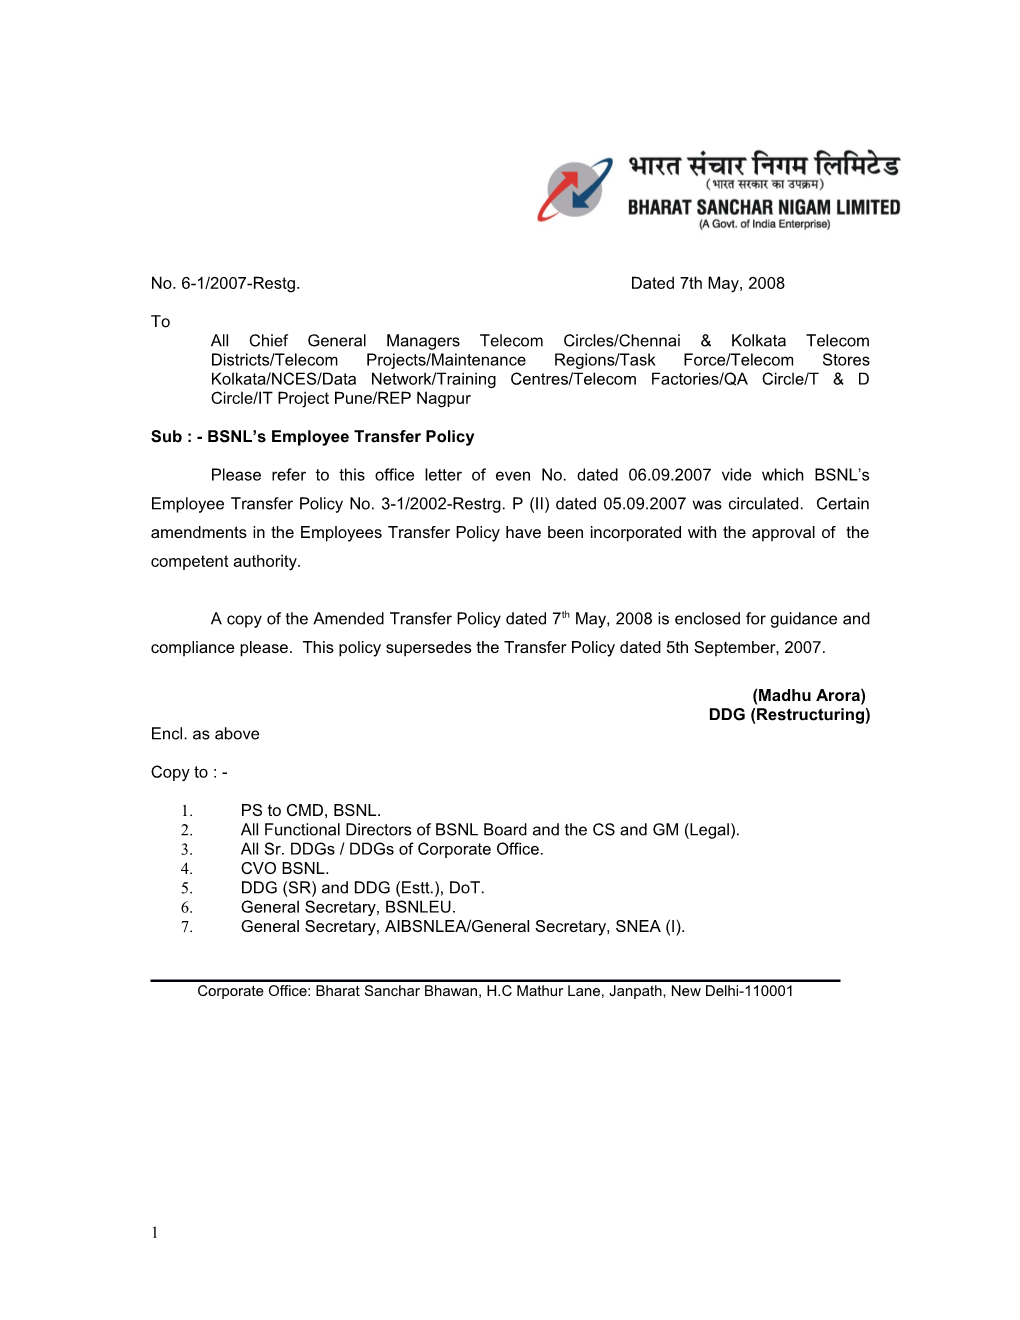 Sub : - BSNL S Employee Transfer Policy